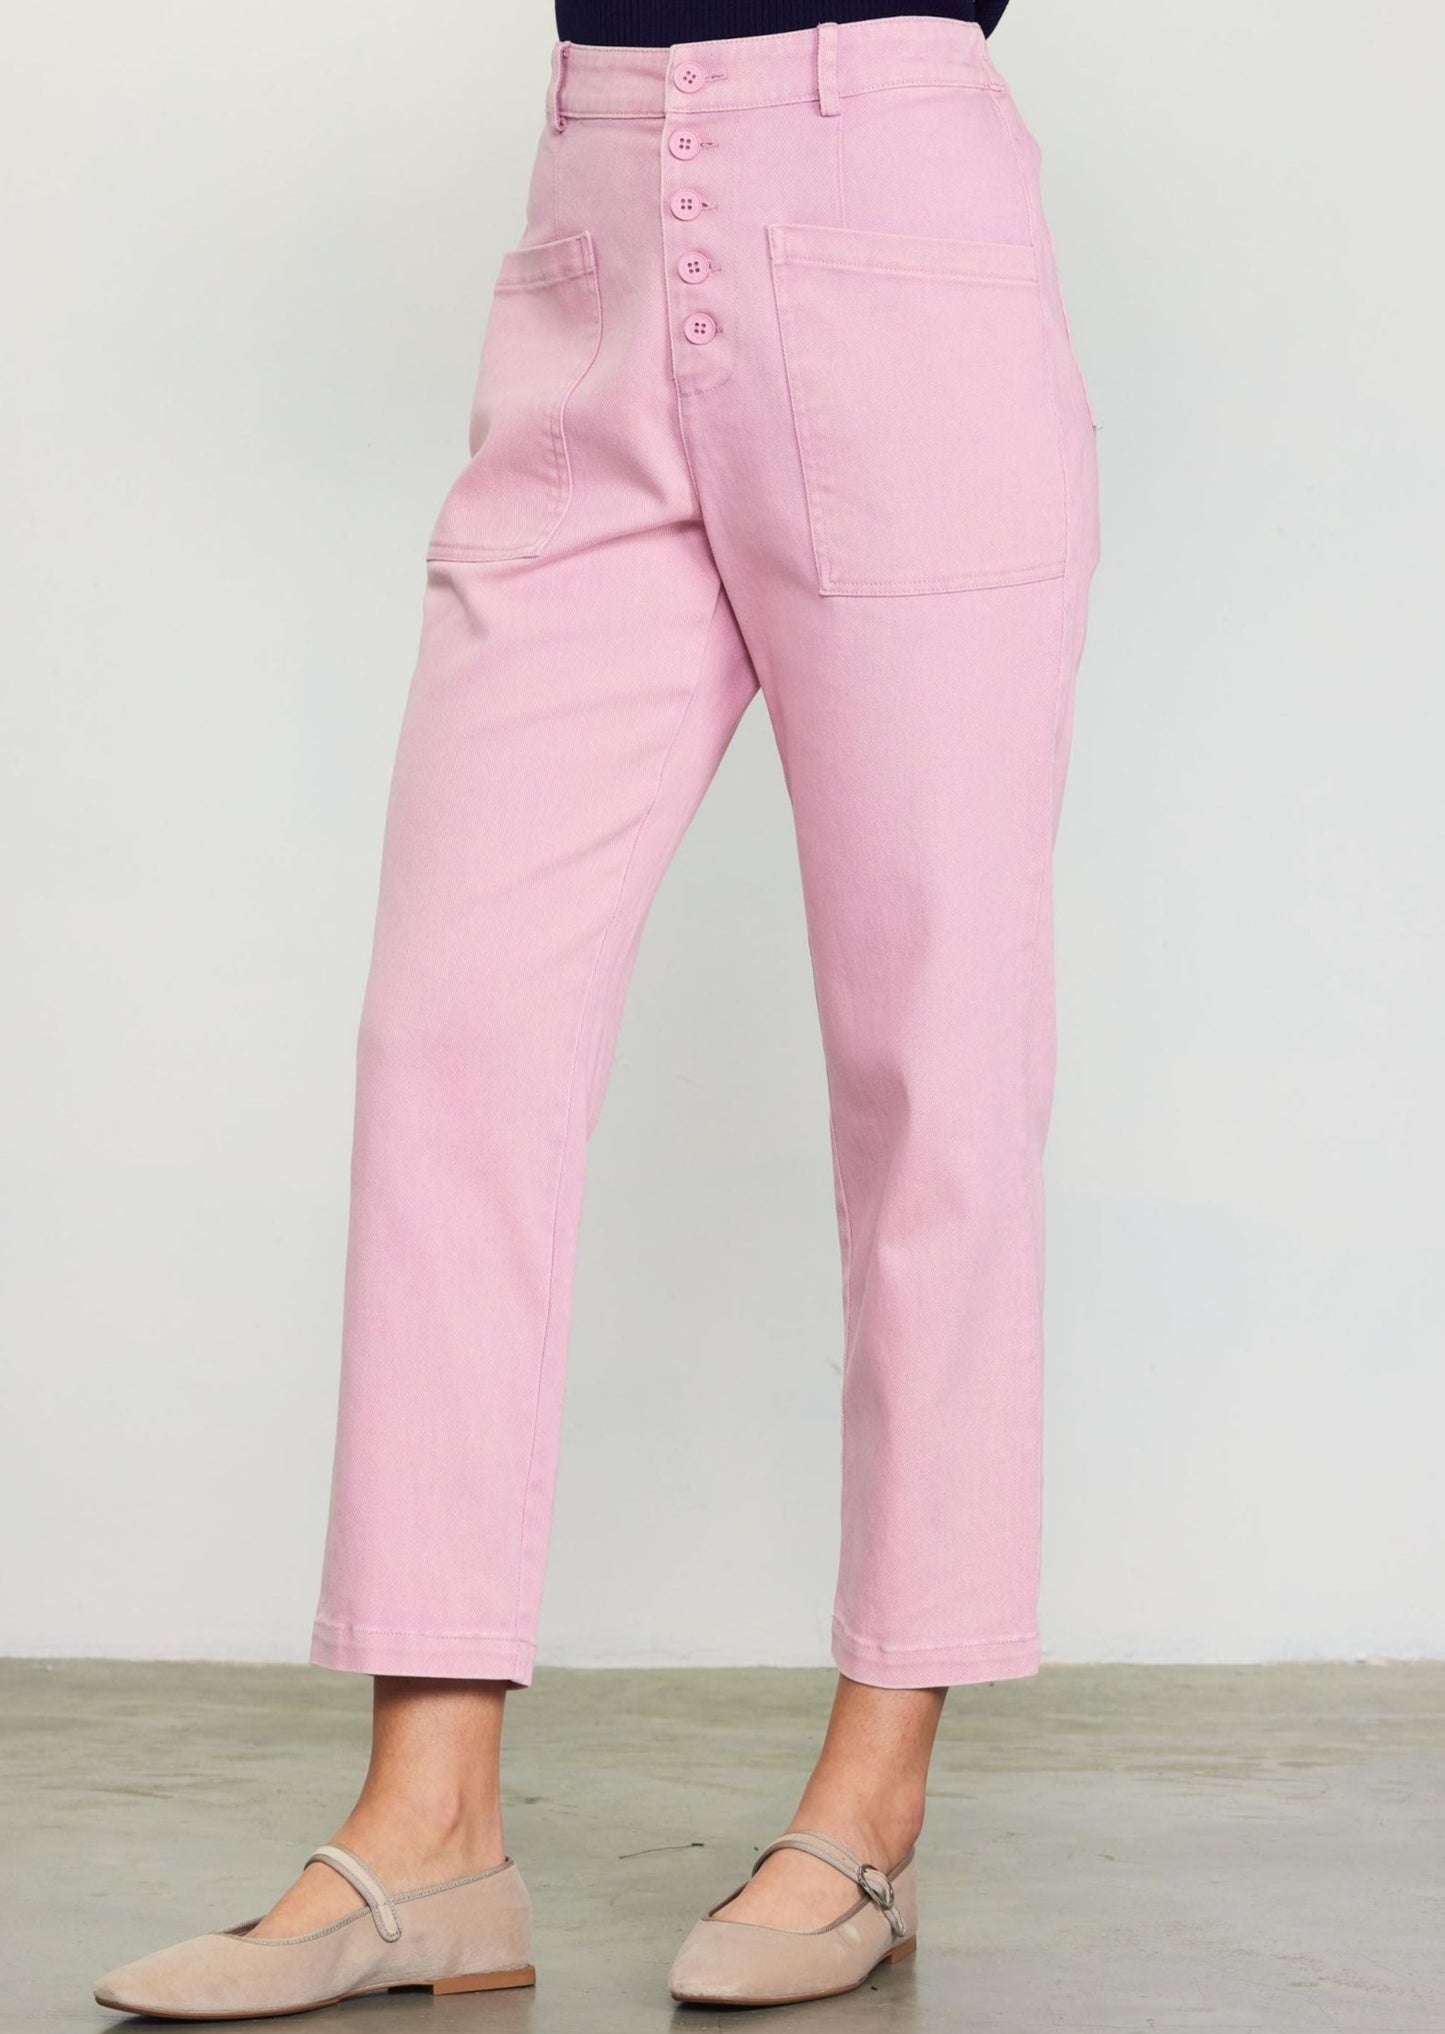 The Pink Pants